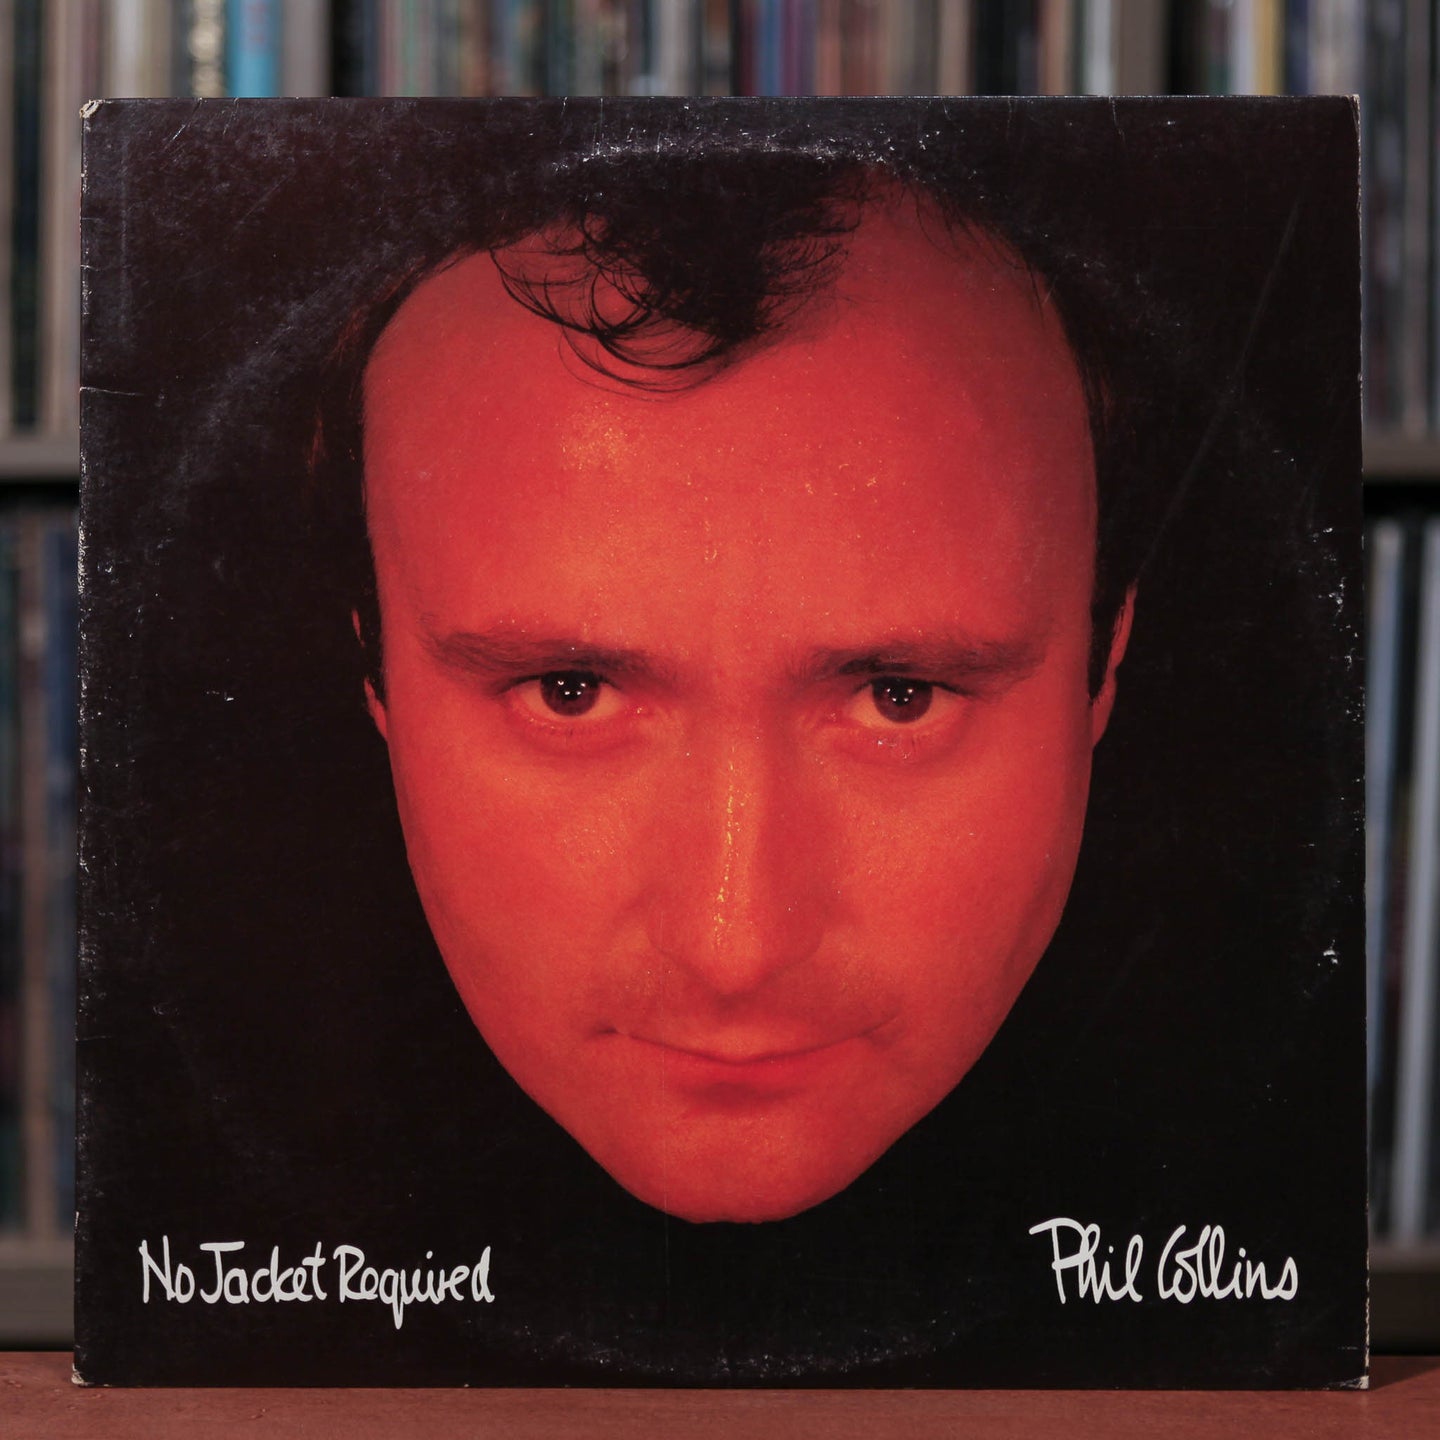 Phil Collins - No Jacket Required - 1985 Atlantic, VG+/VG